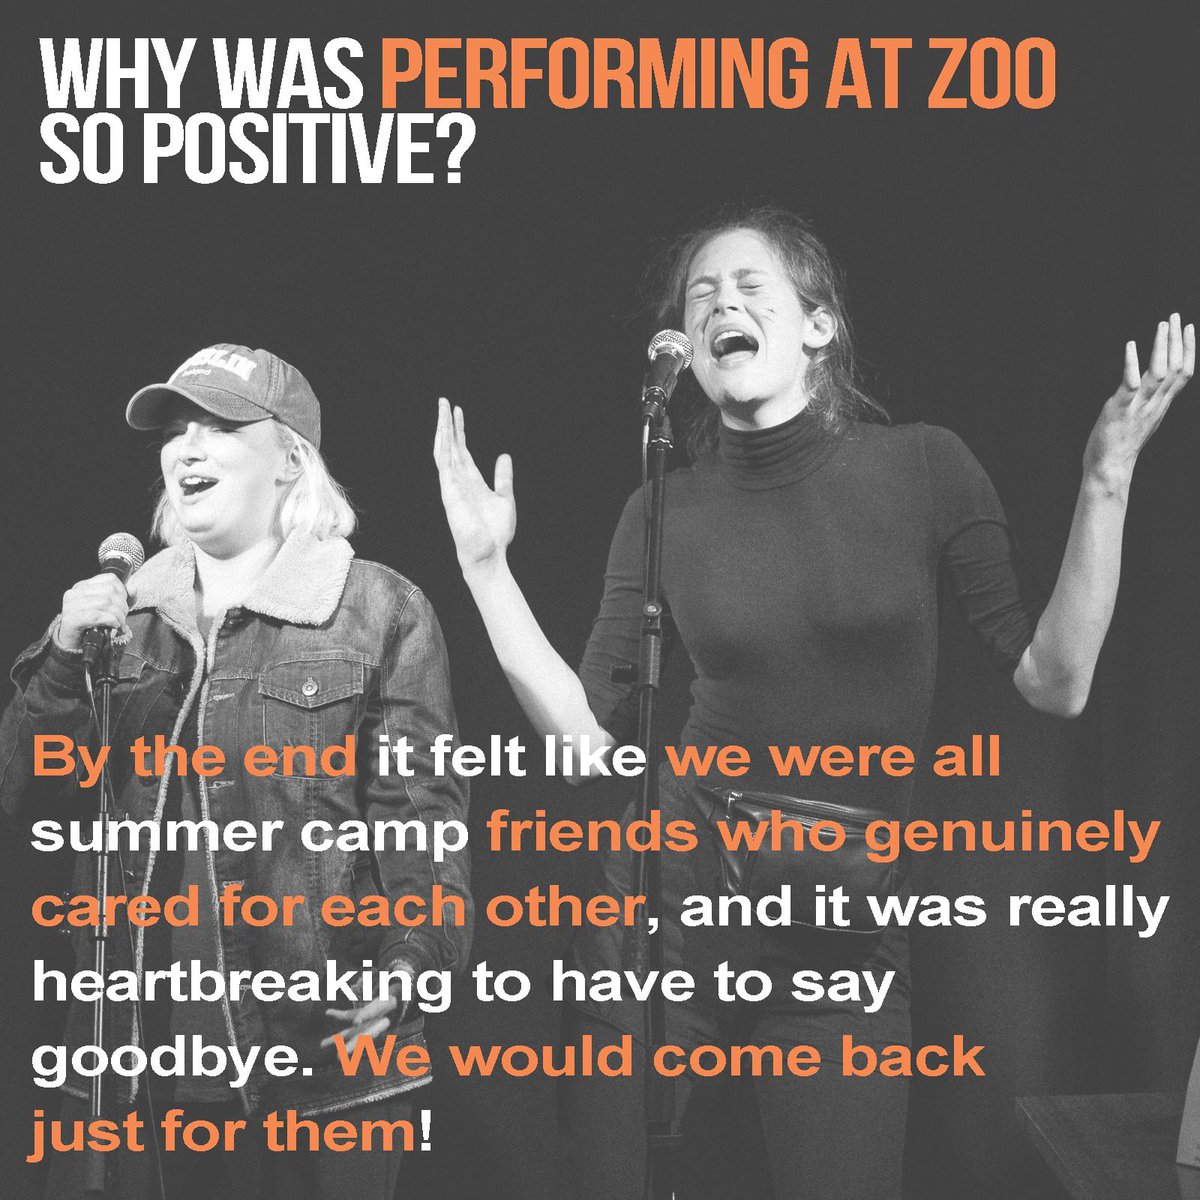 We're programming exceptional #theatre #dance and #circus for #ZOO24 at #edfringe - if you're looking for a home for your work, get in touch! Here's Griffin Kelly on what made the ZOO experience with Two Cats On A Date so amazing. More Info & Apply via zoovenues.co.uk